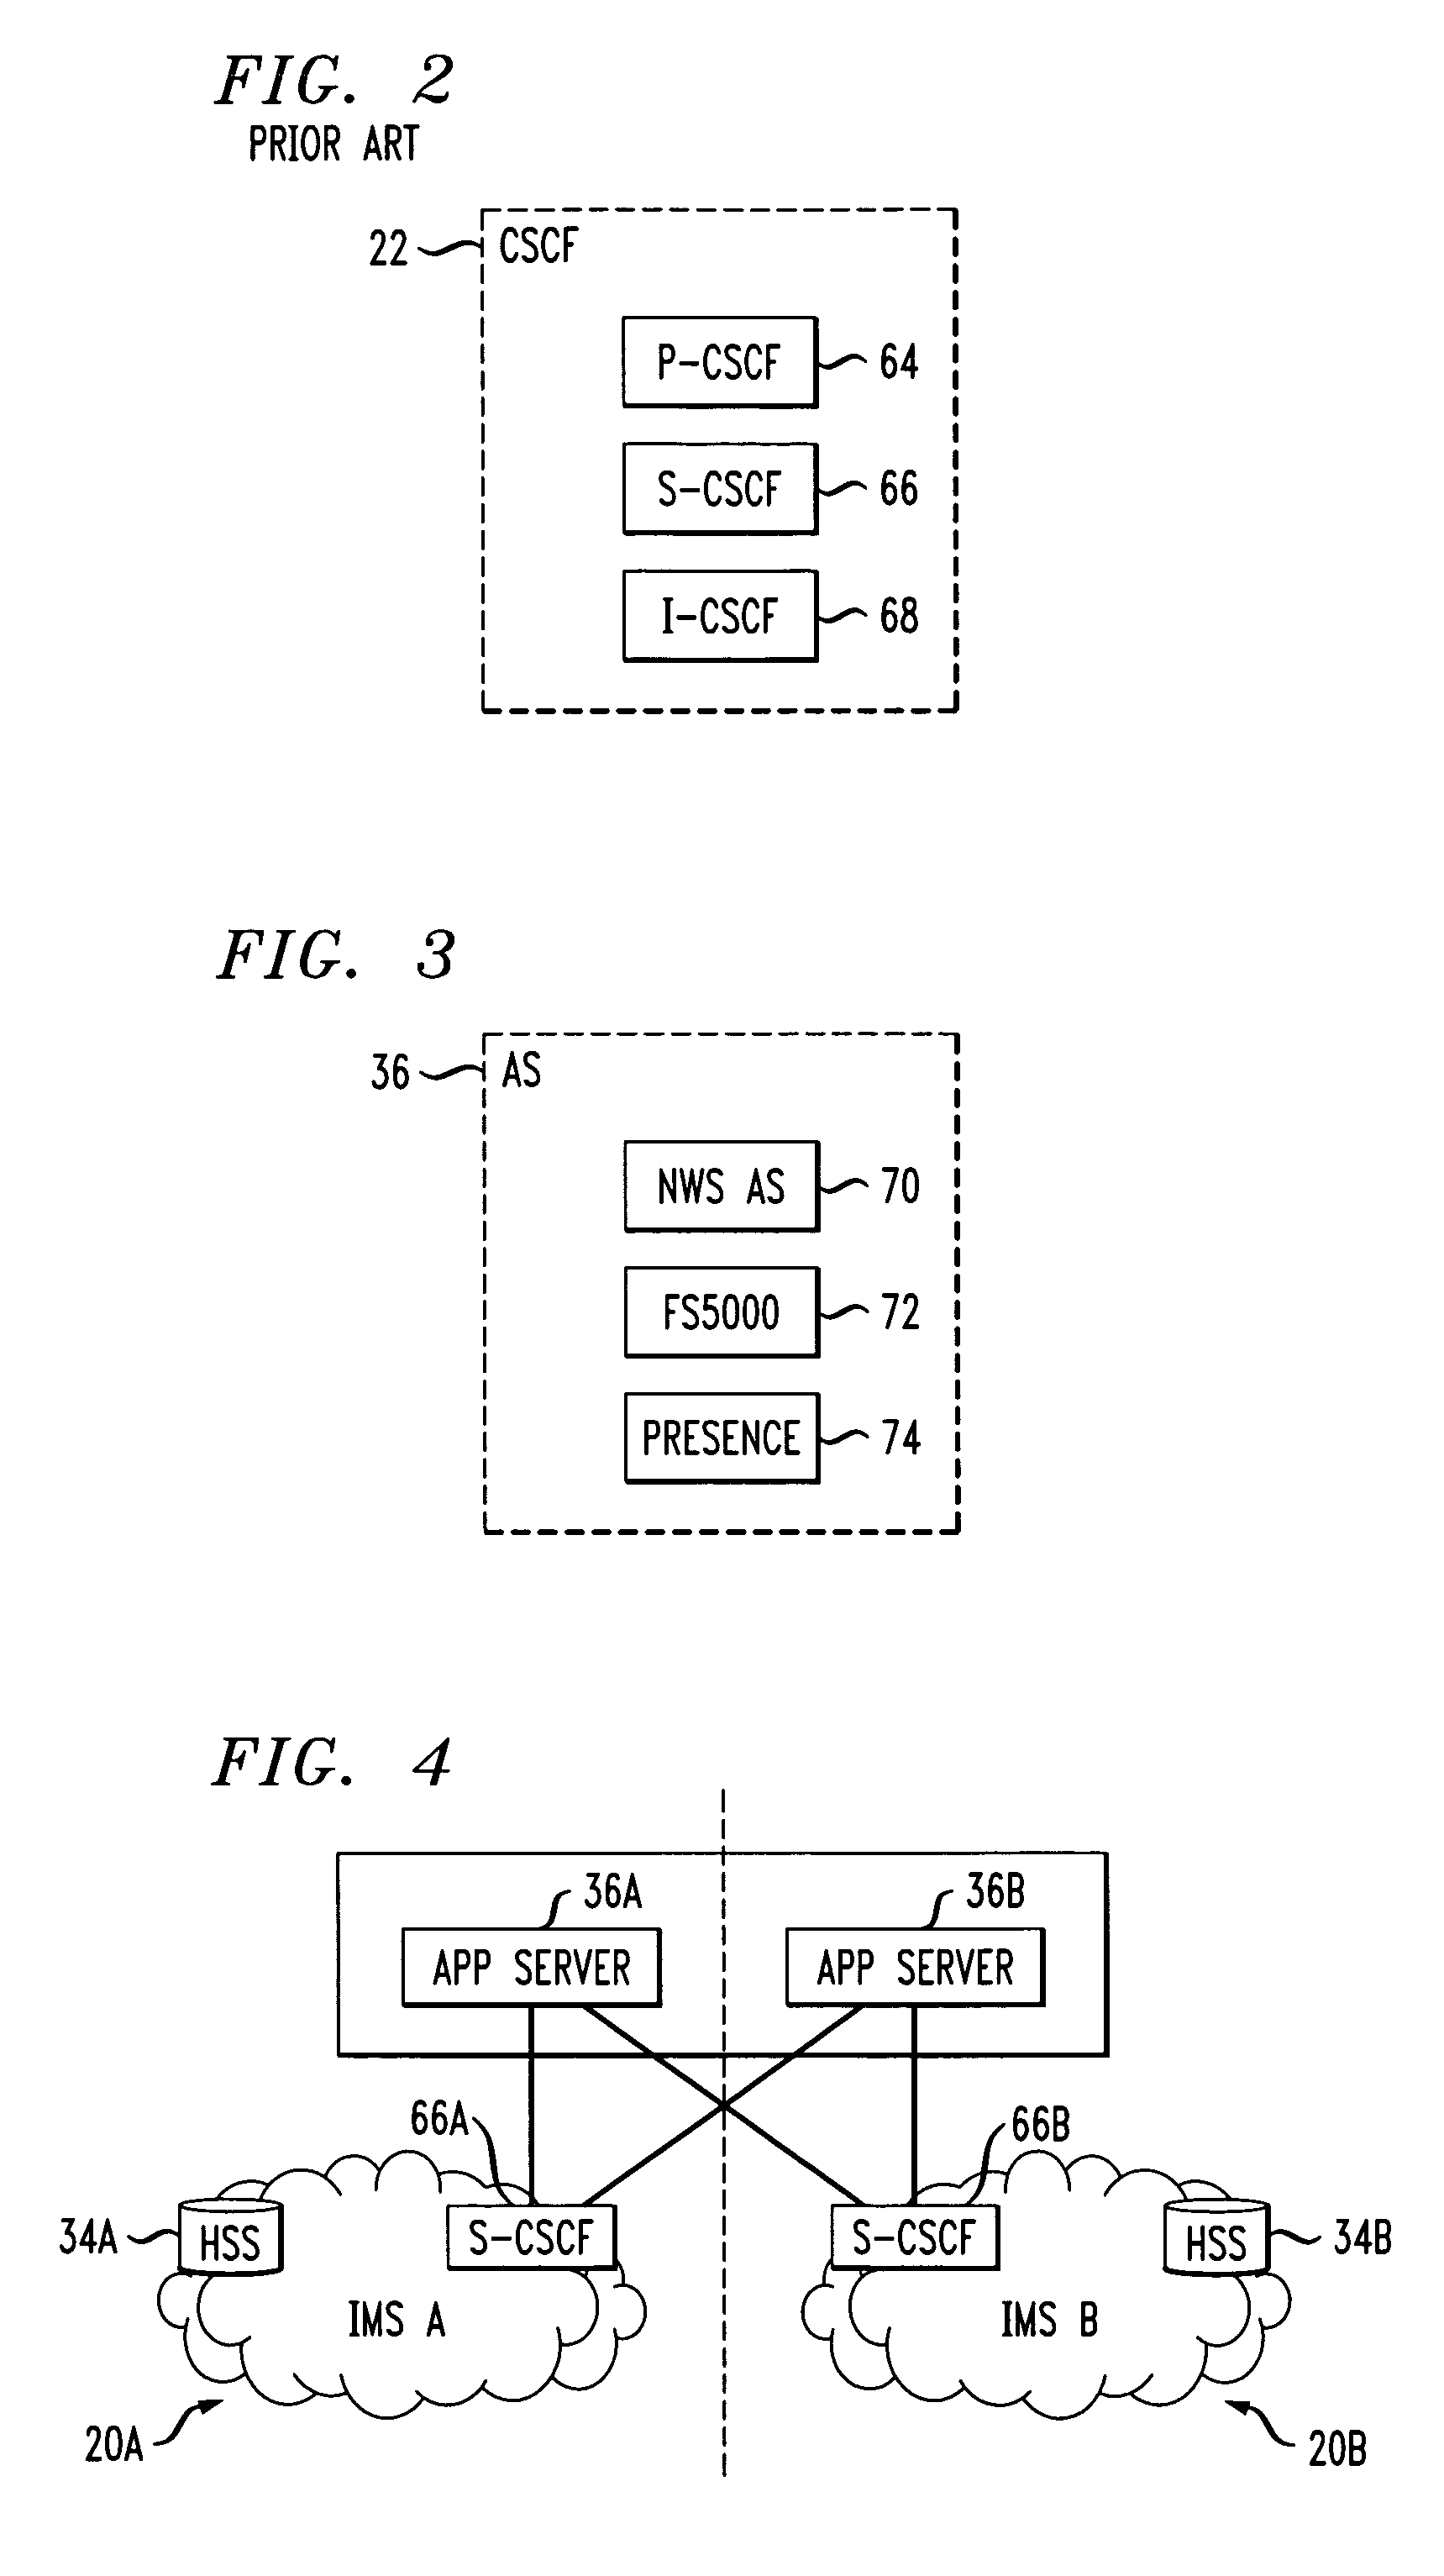 Method and apparatus for allowing peering relationships between telecommunications networks